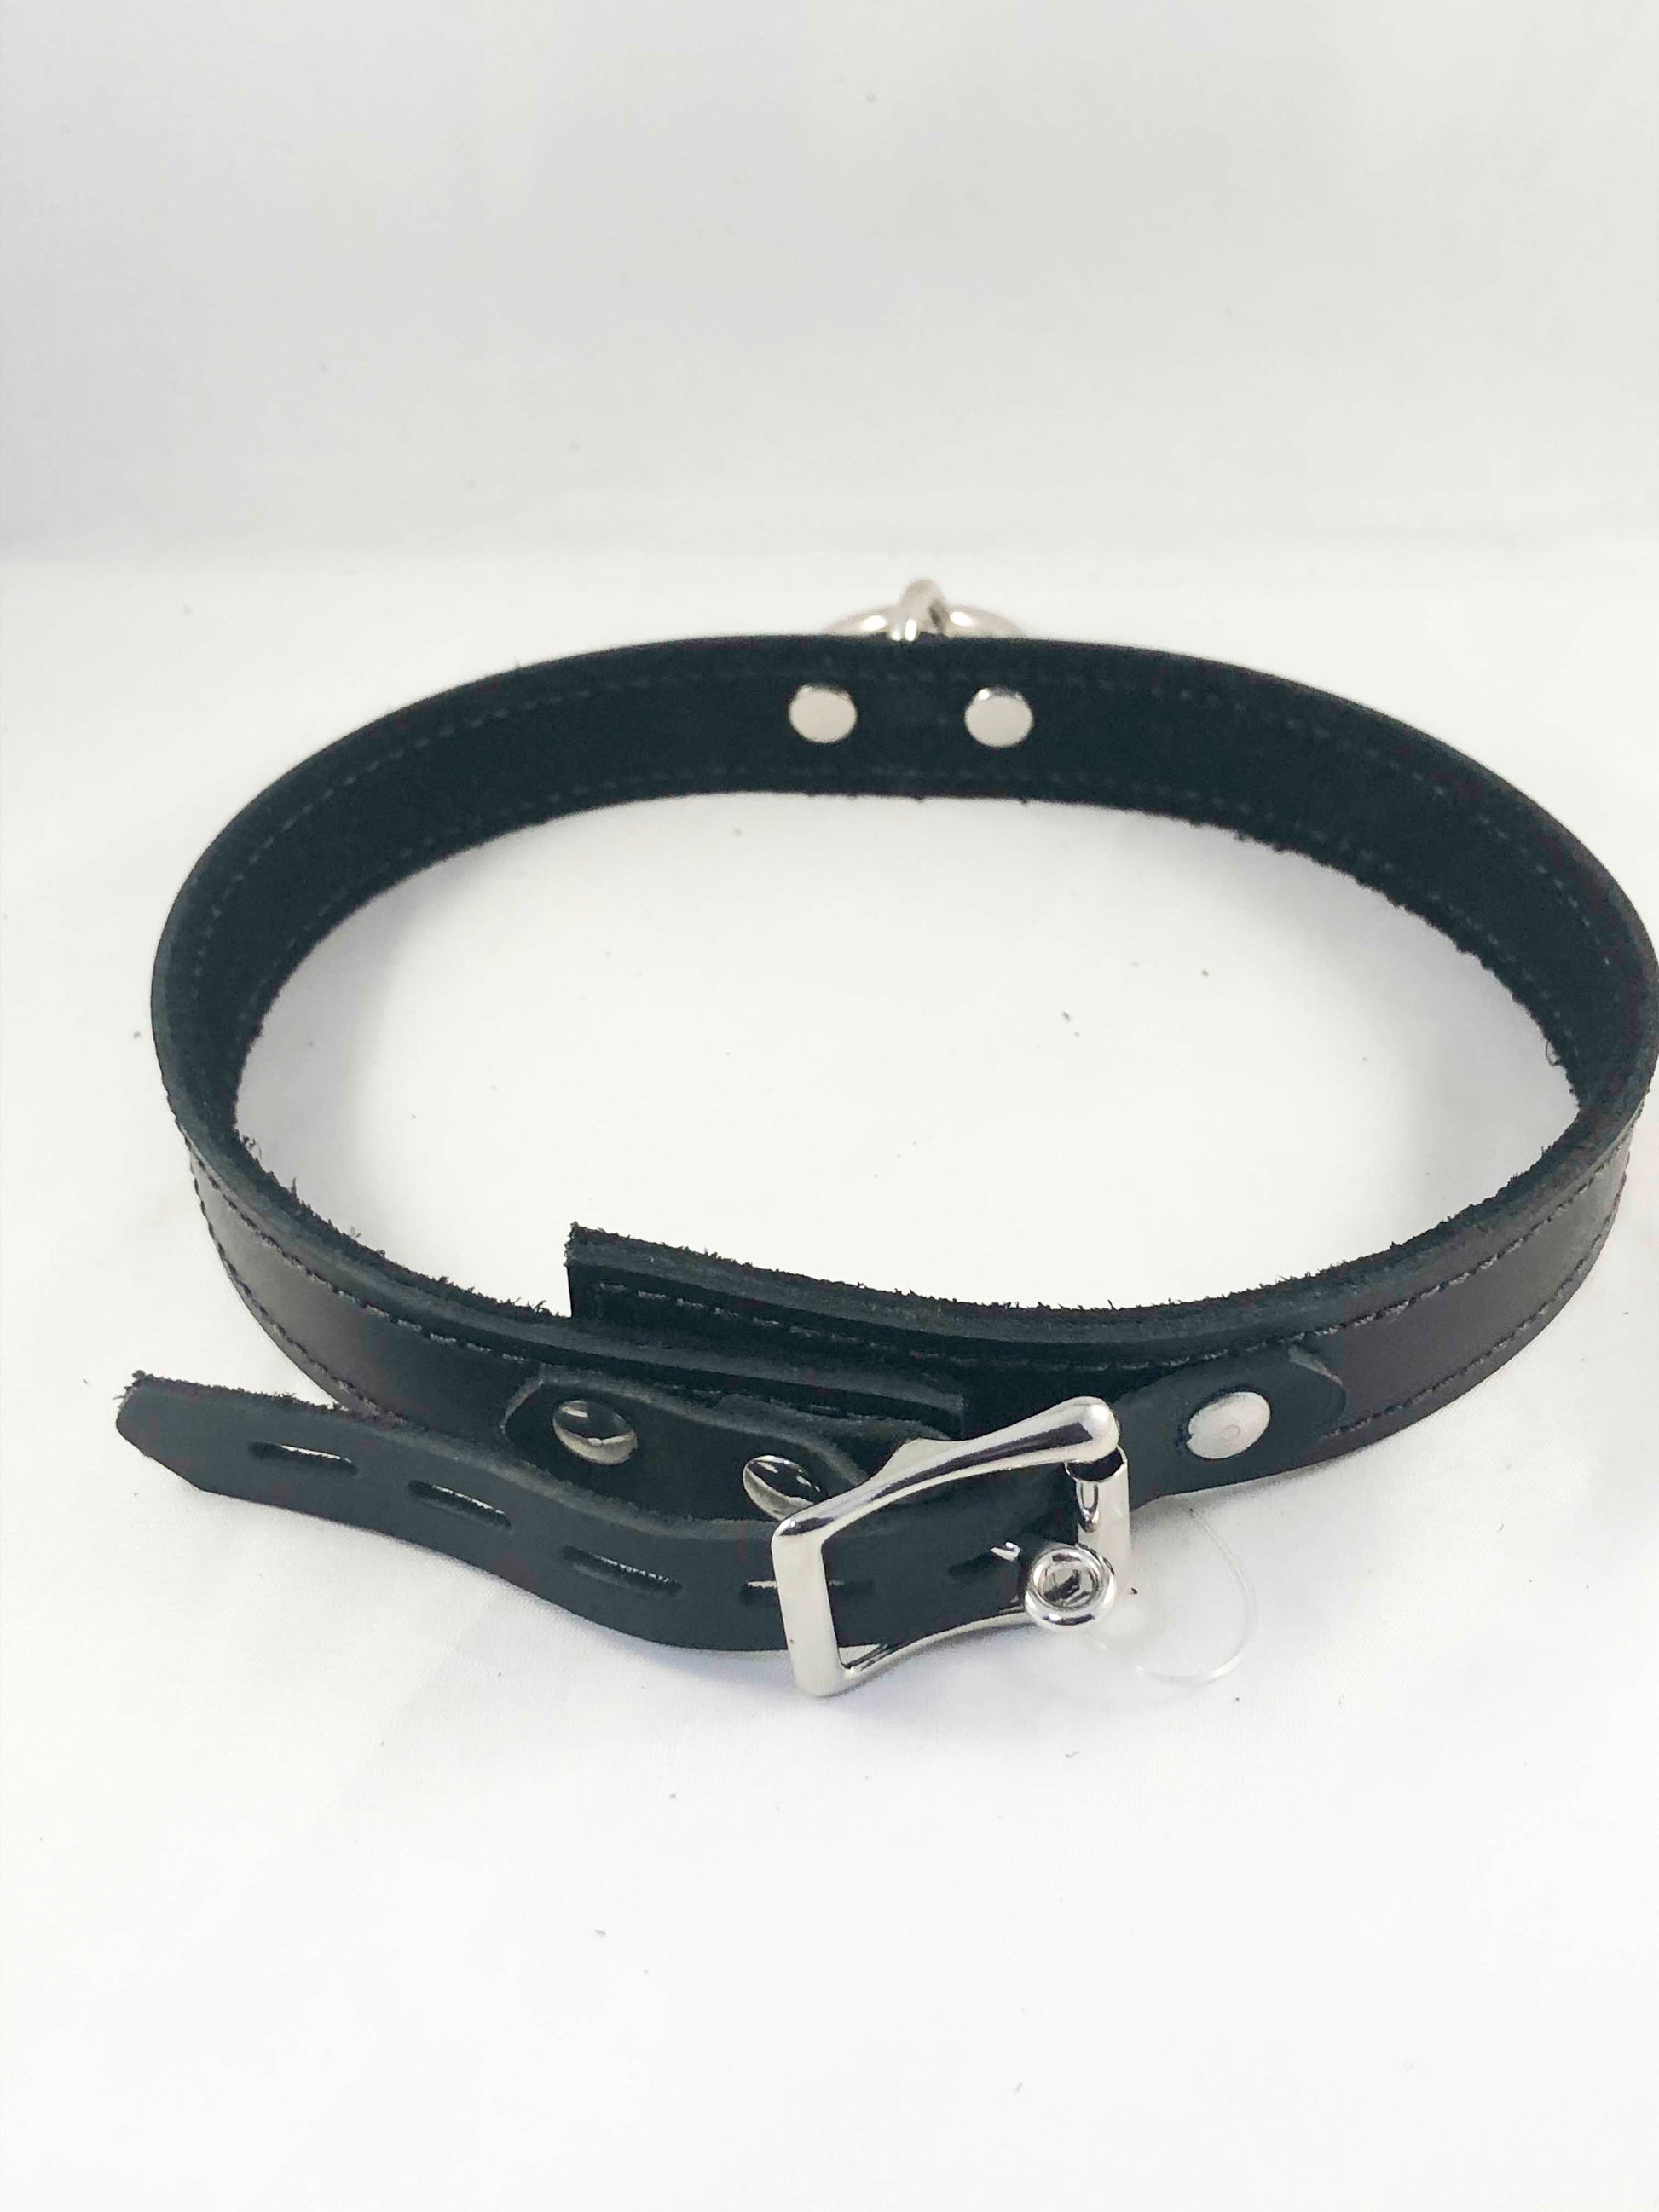 Back view of the black Basic Single Ring Collar.